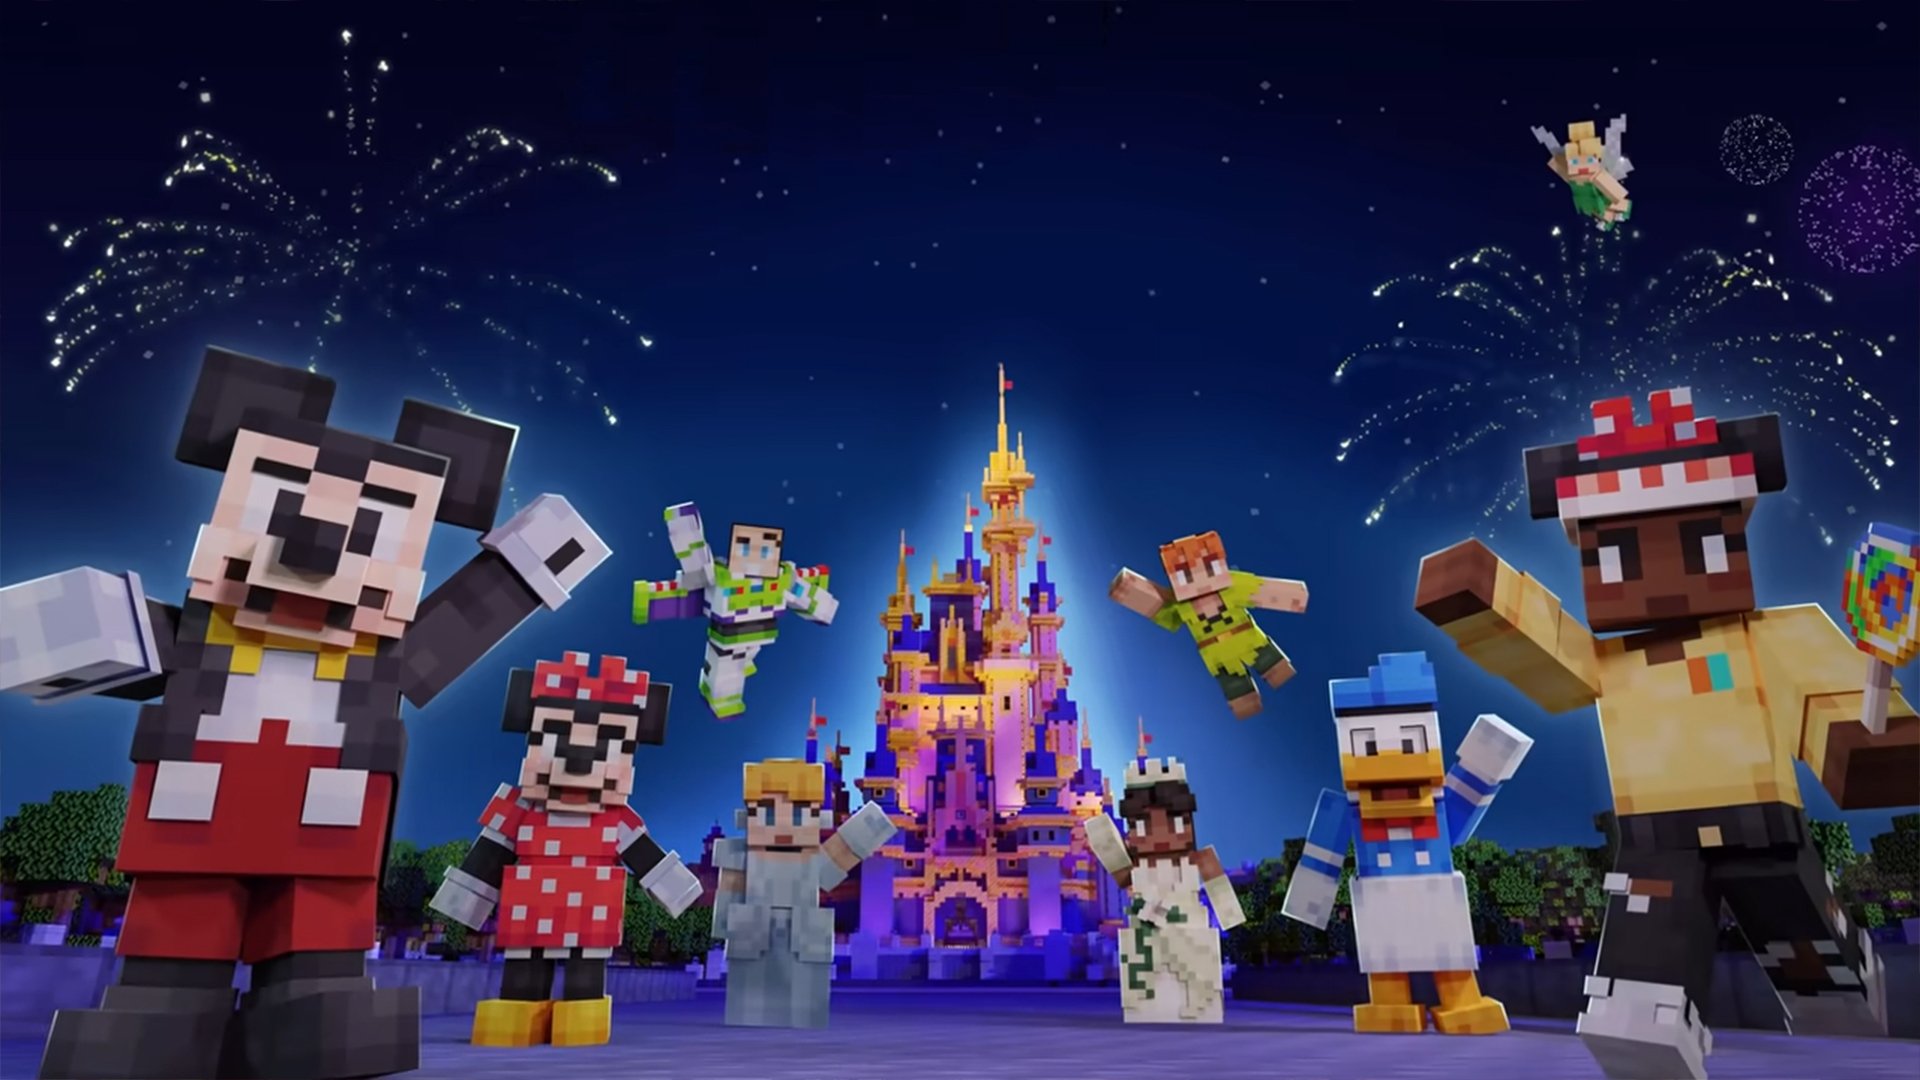 Magic Kingdom comes to Minecraft in celebration of 50 years